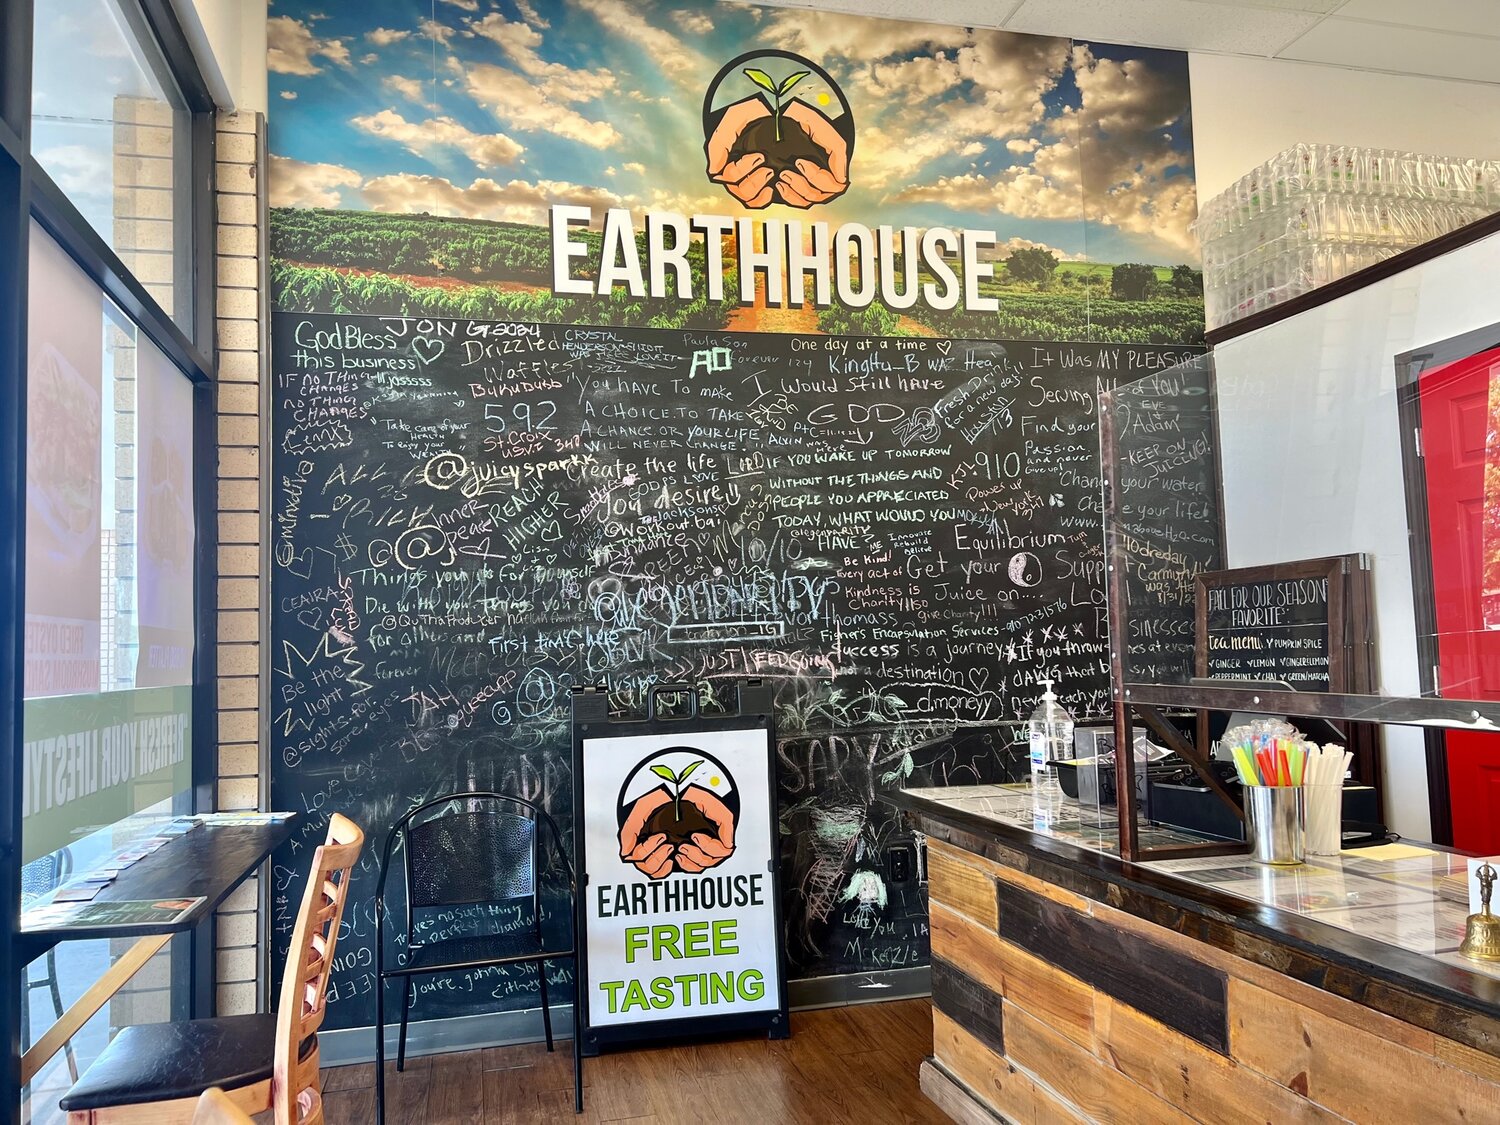 Customers express themselves on the board at Earthhouse.